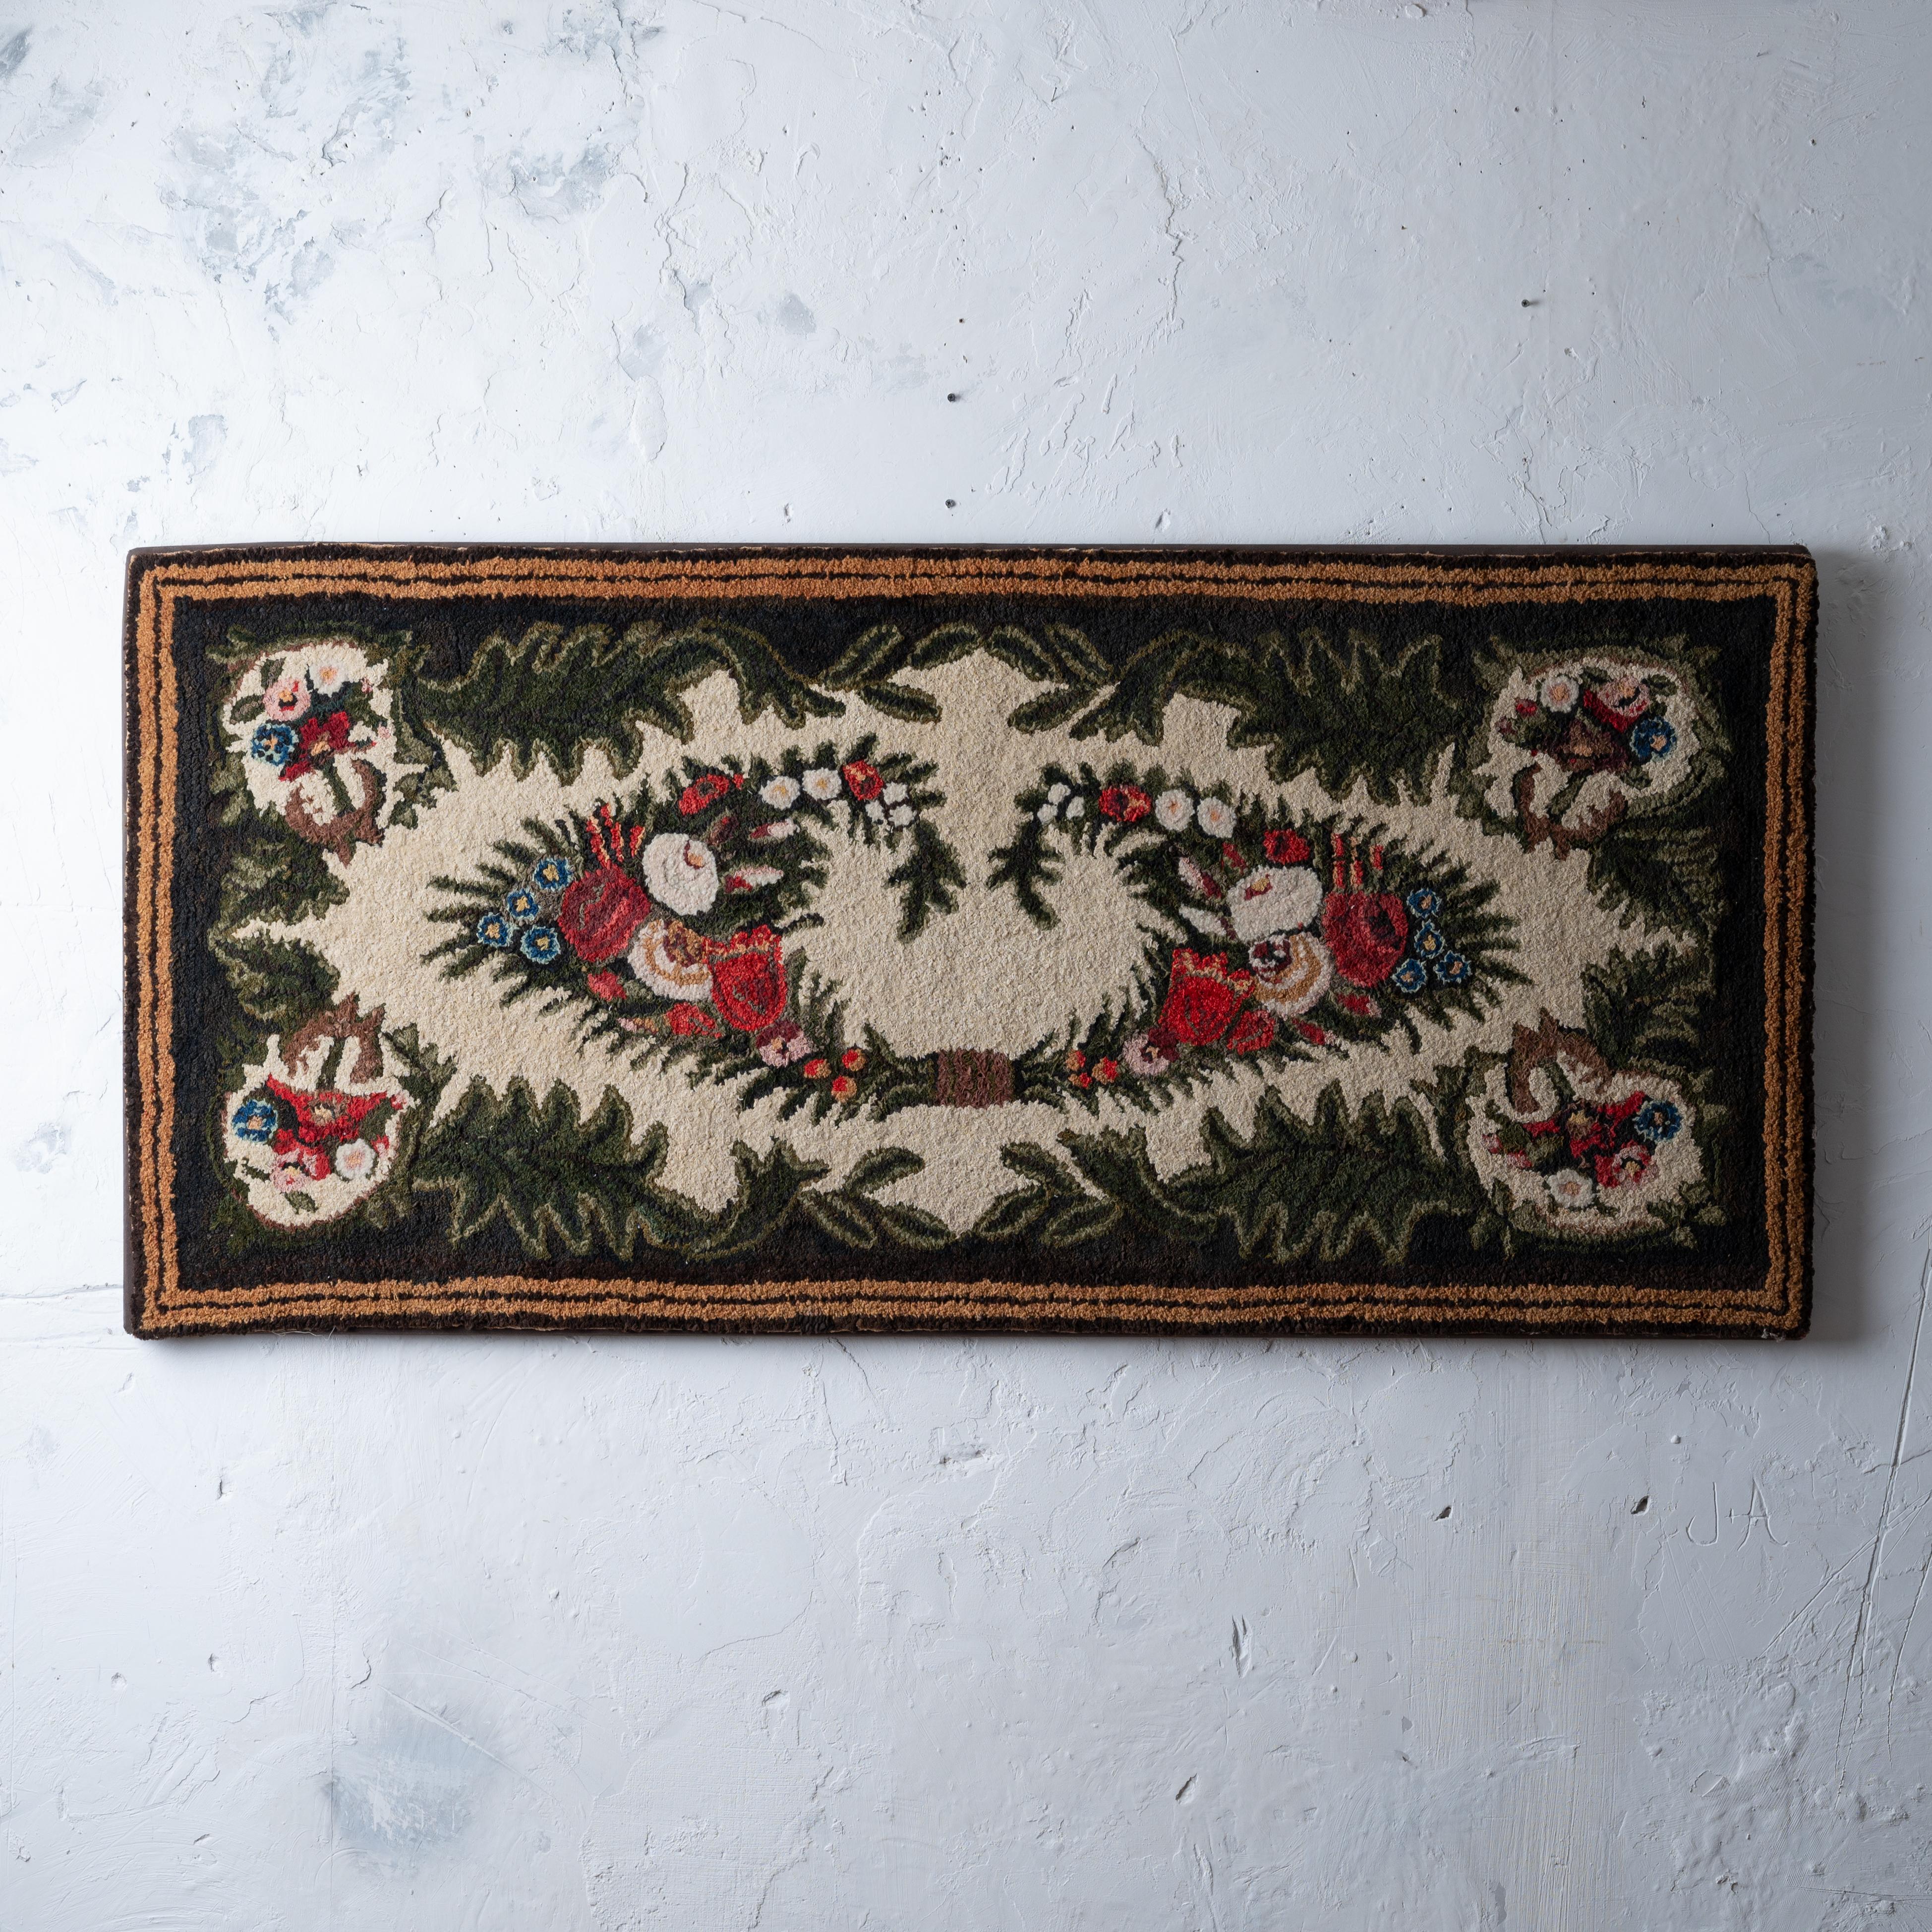 A floral shirred rug, New England, circa 1850.
Professionally mounted on stretched canvas frame.

67 by 32 inches


